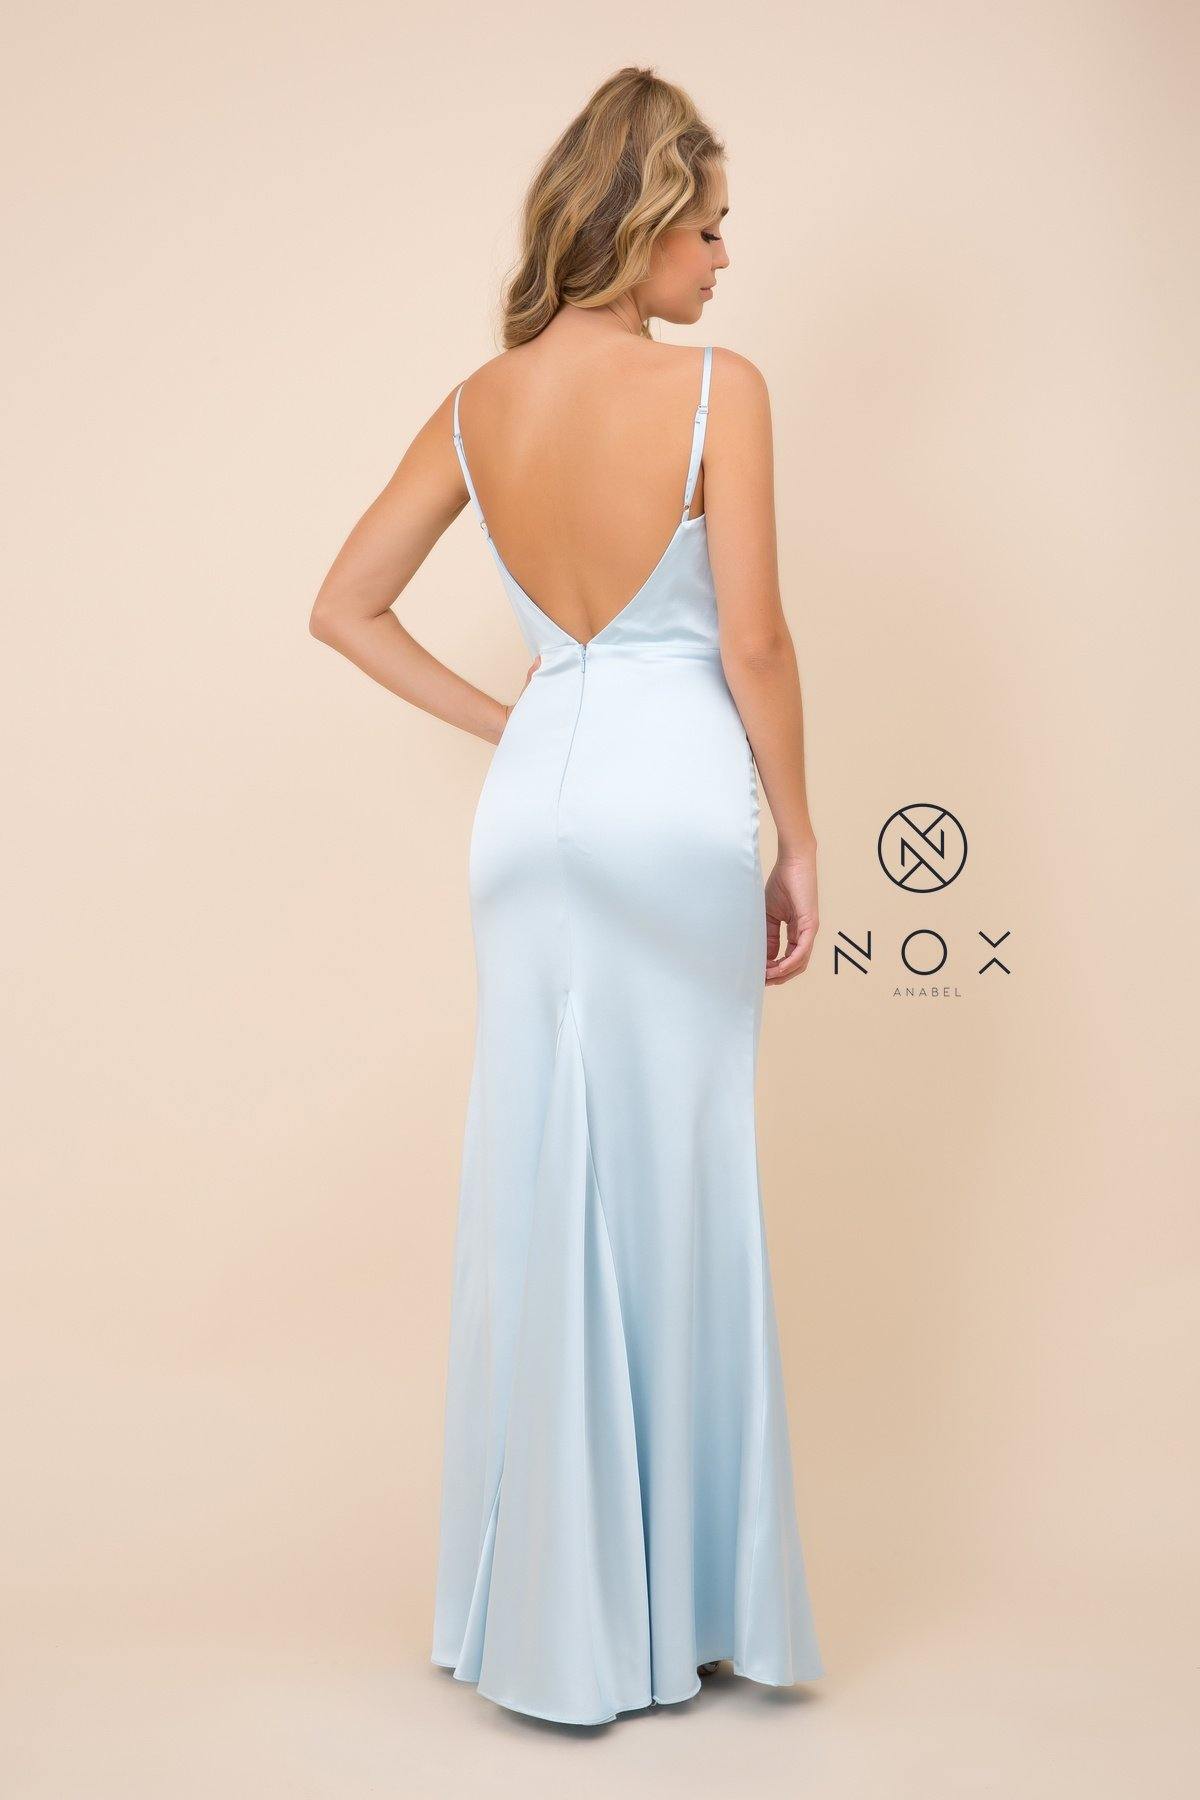 Prom Long Formal Spaghetti Strap Evening Gown - The Dress Outlet Nox Anabel